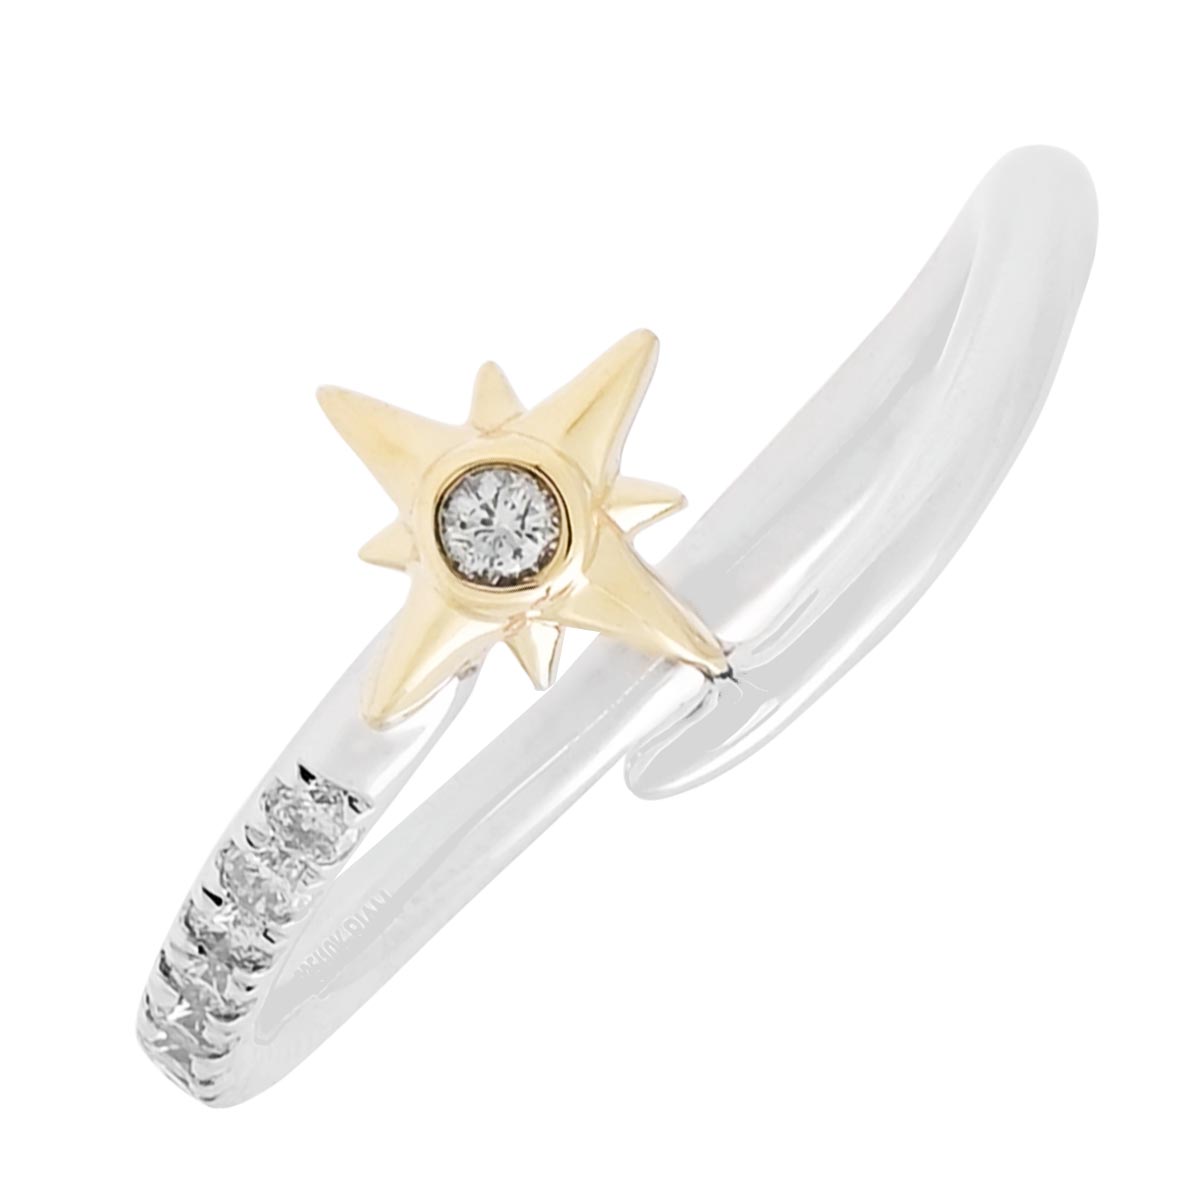 Northern Star Celestial Diamond Fashion Ring in 10kt Yellow Gold and Sterling Silver (1/10ct tw)